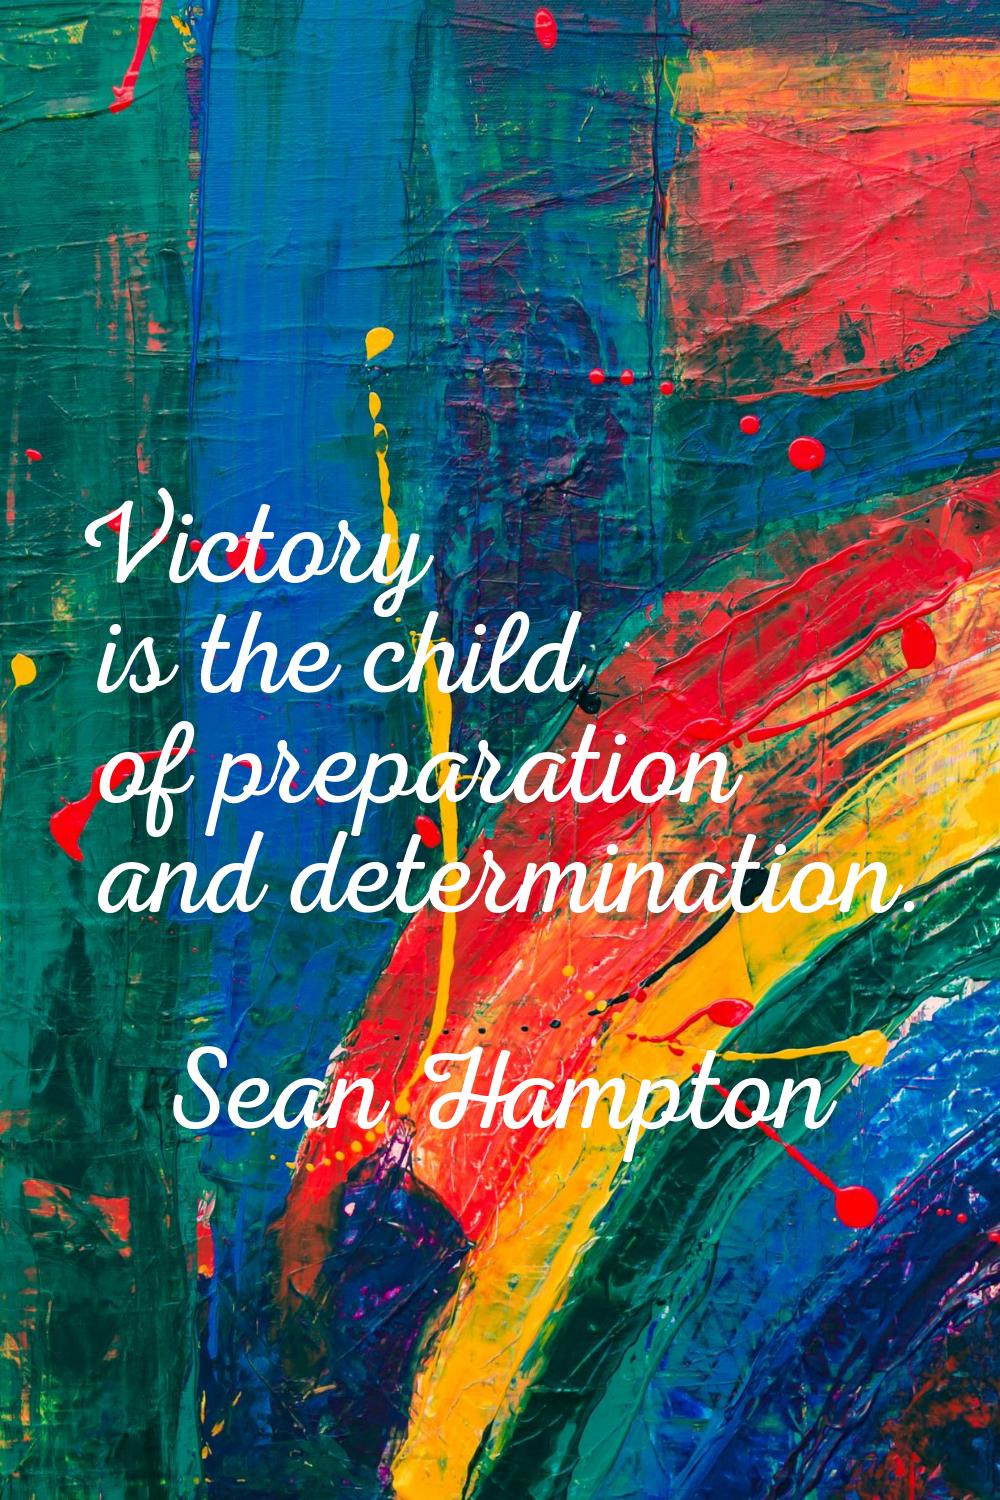 Victory is the child of preparation and determination.